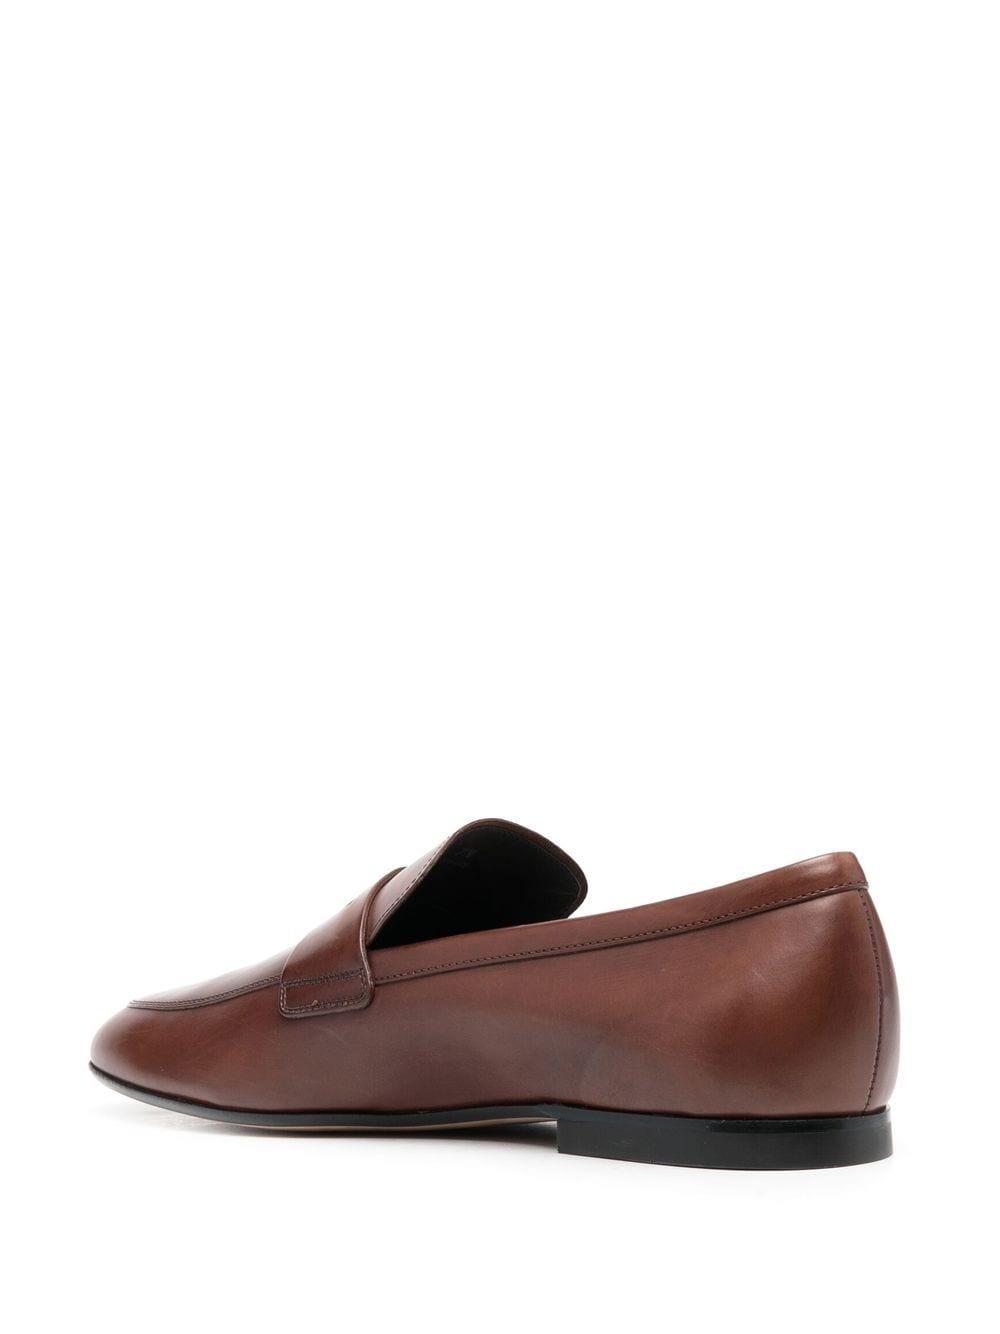 TOD'S Luxury Cognac Penny Strap Loafers for Men